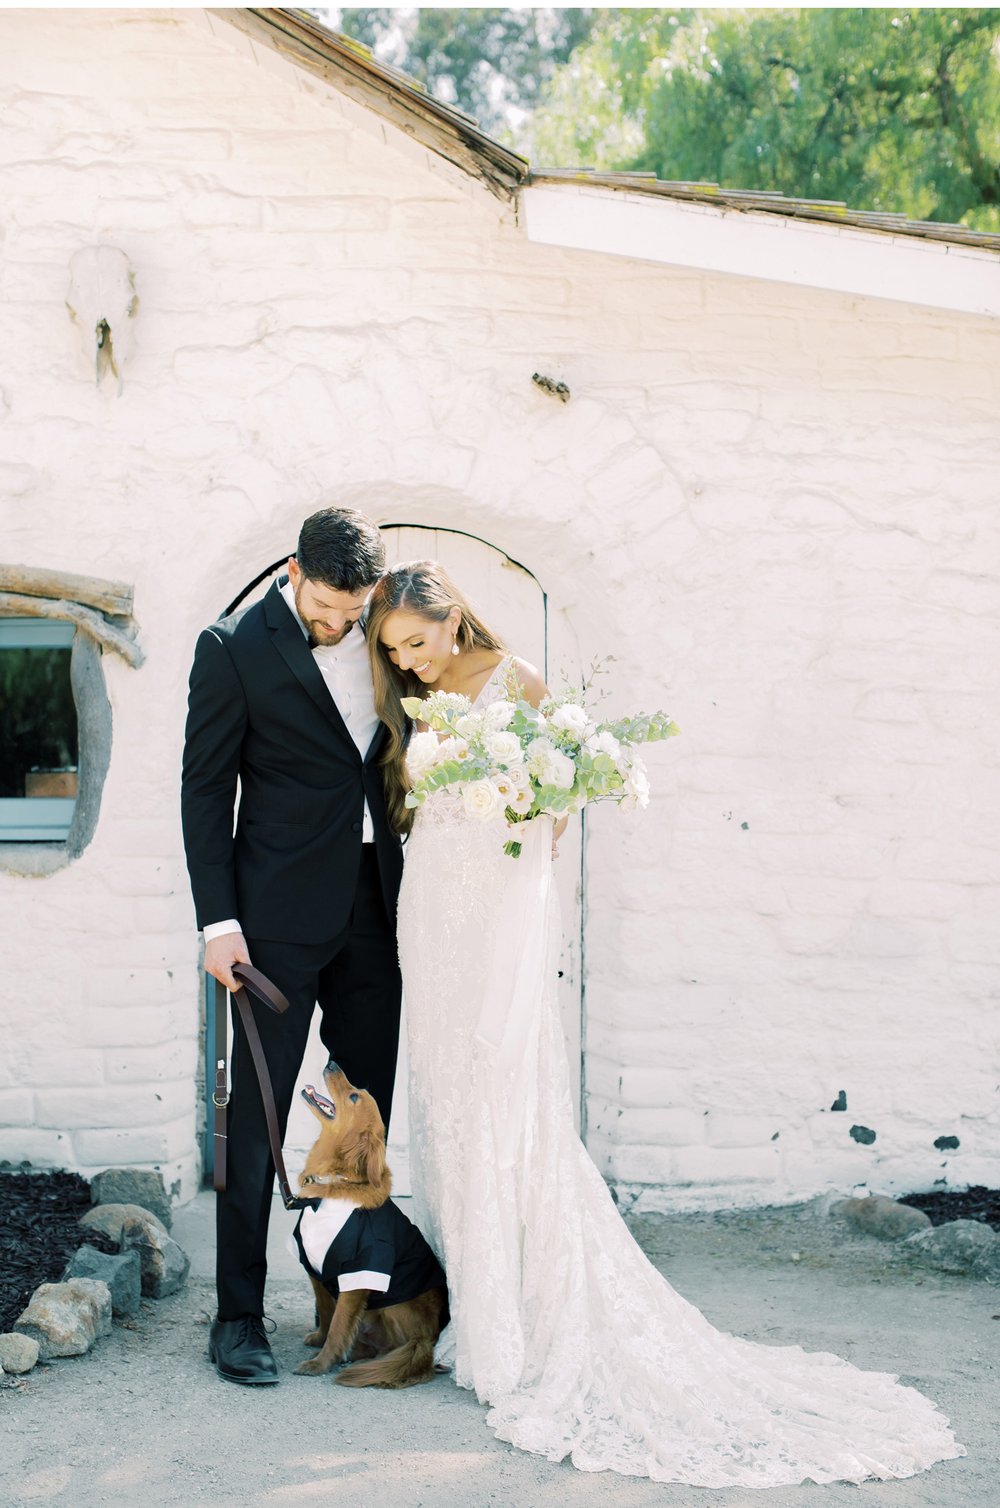 Dog-Wedding-Photo-Clean-and-Modern-Wedding-Photography-High-End-Wedding-Photographers-Bright-and-Airy-Photography-Southern-California-Events-Bride-and-Groom-Photo_01.jpg